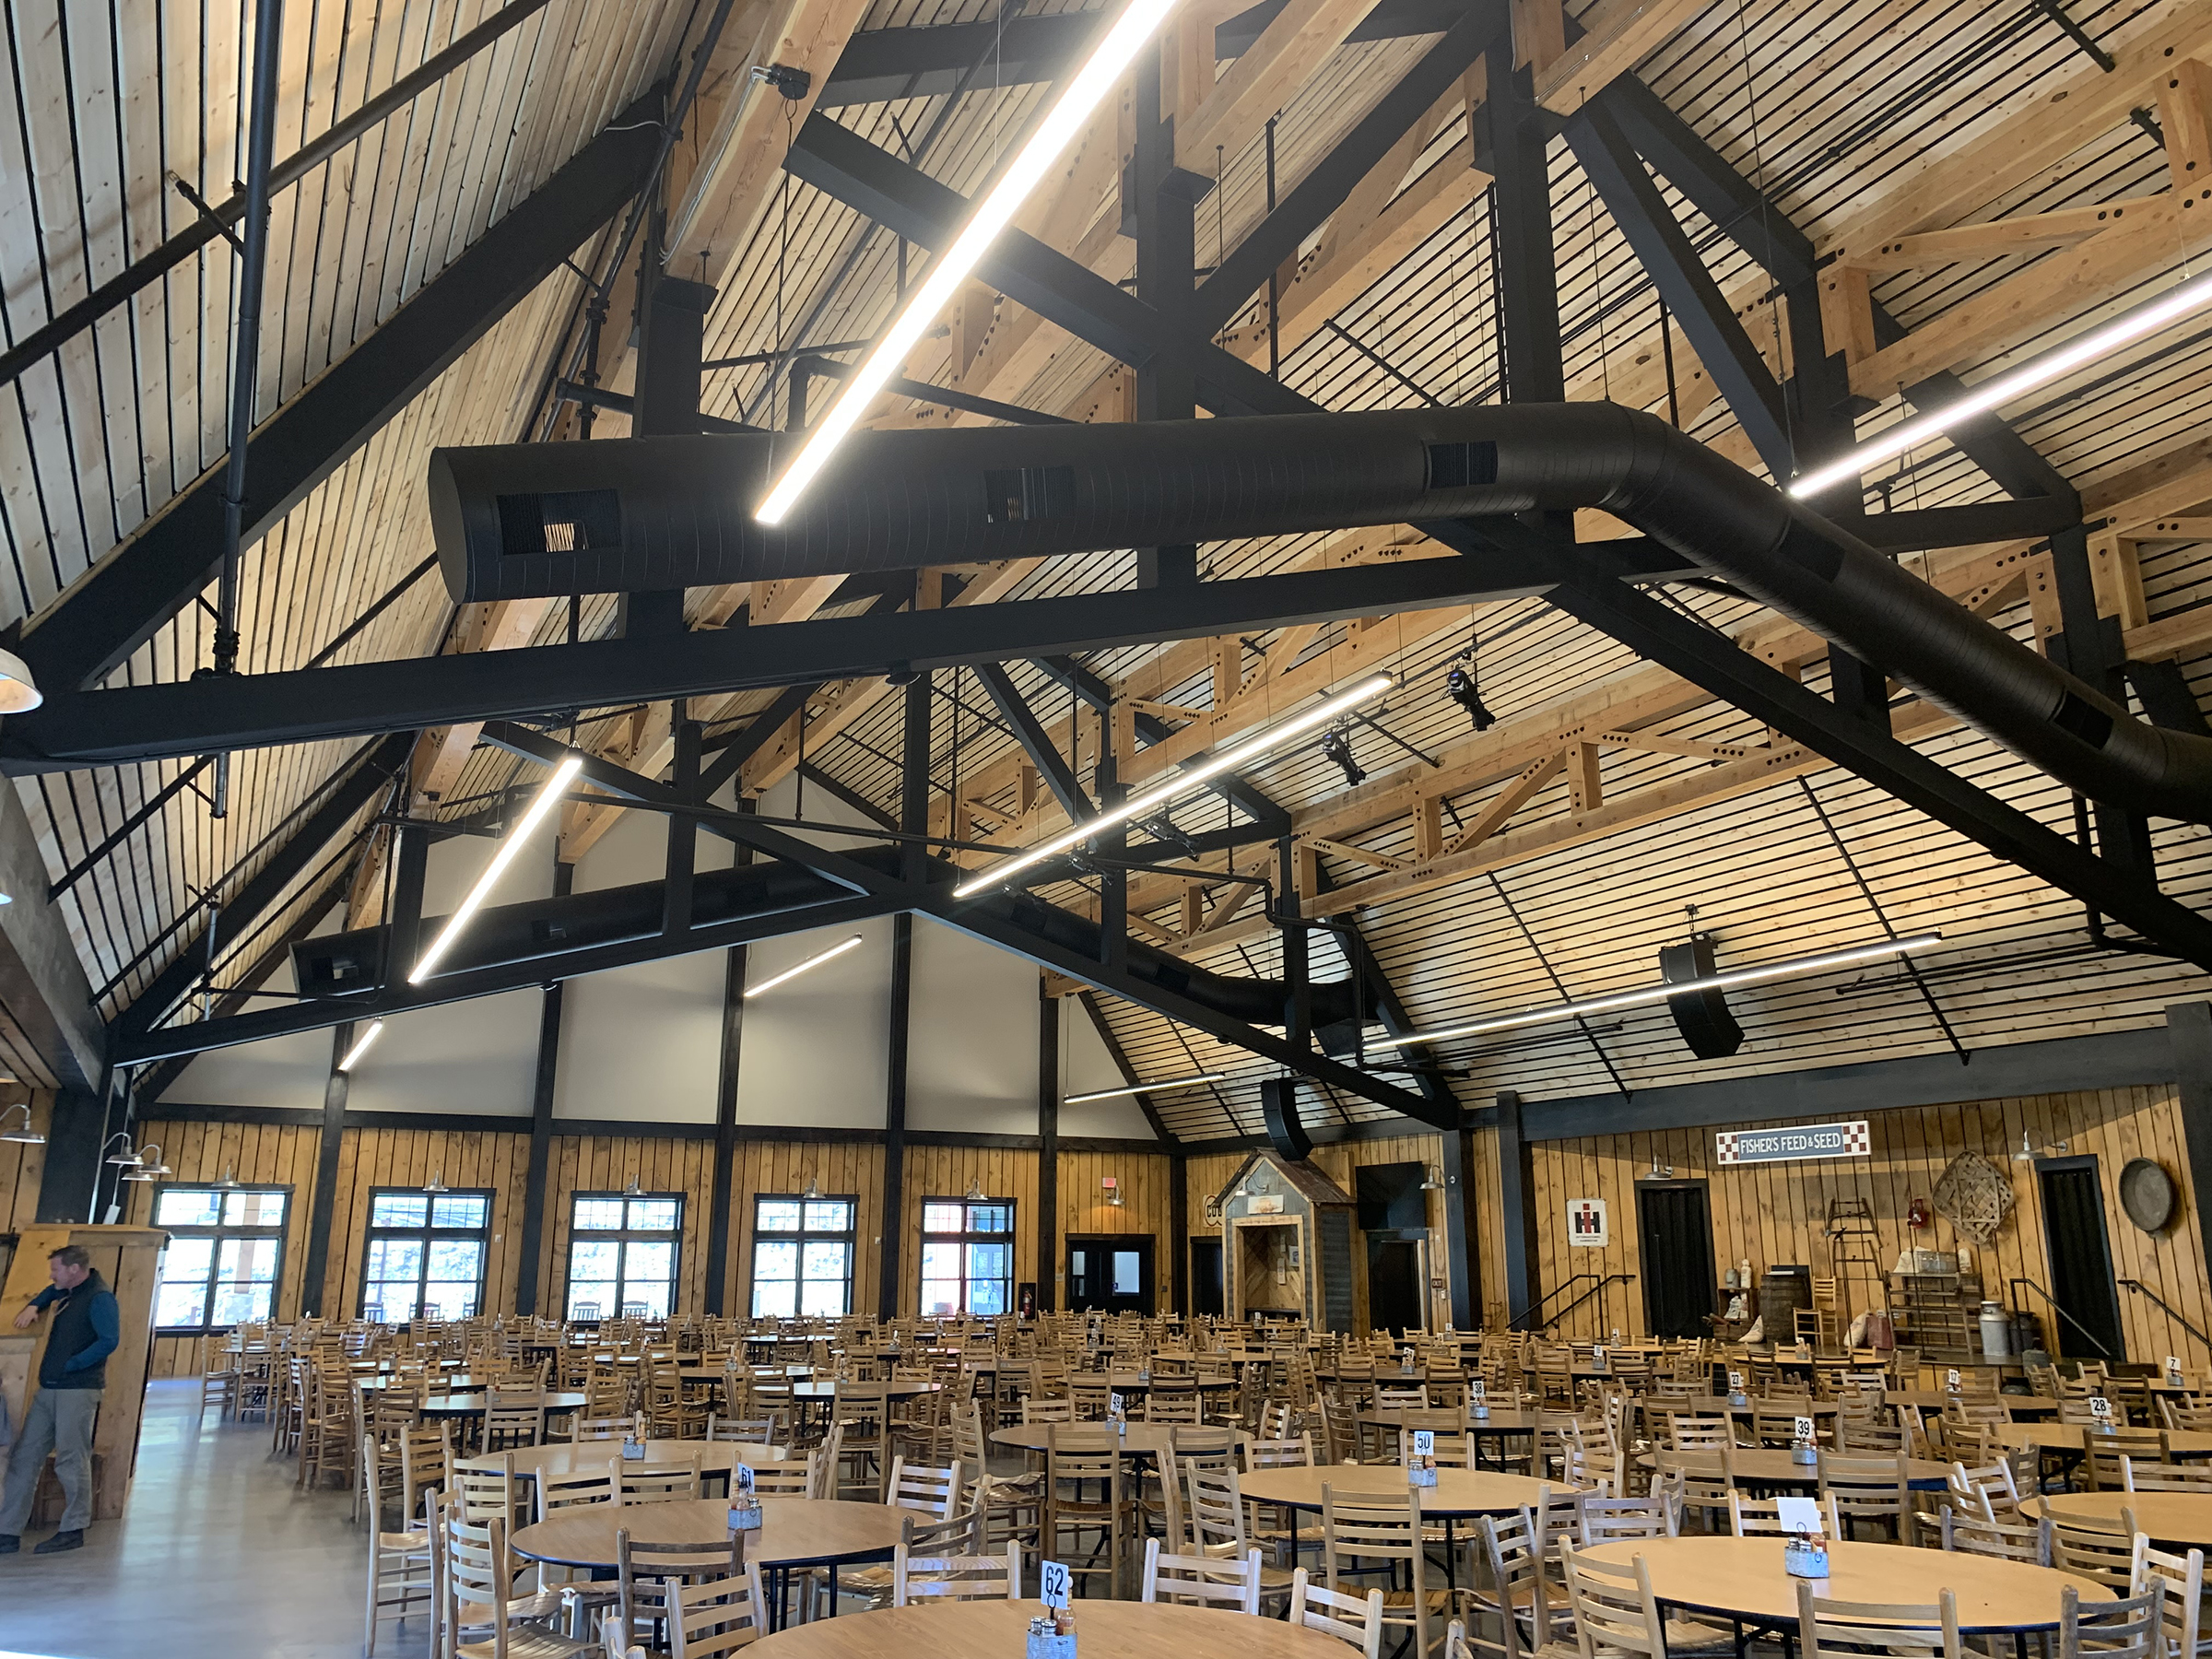 Windy Gap Dining Hall, Horse Barn, and Infrastructure photo 2 of 2